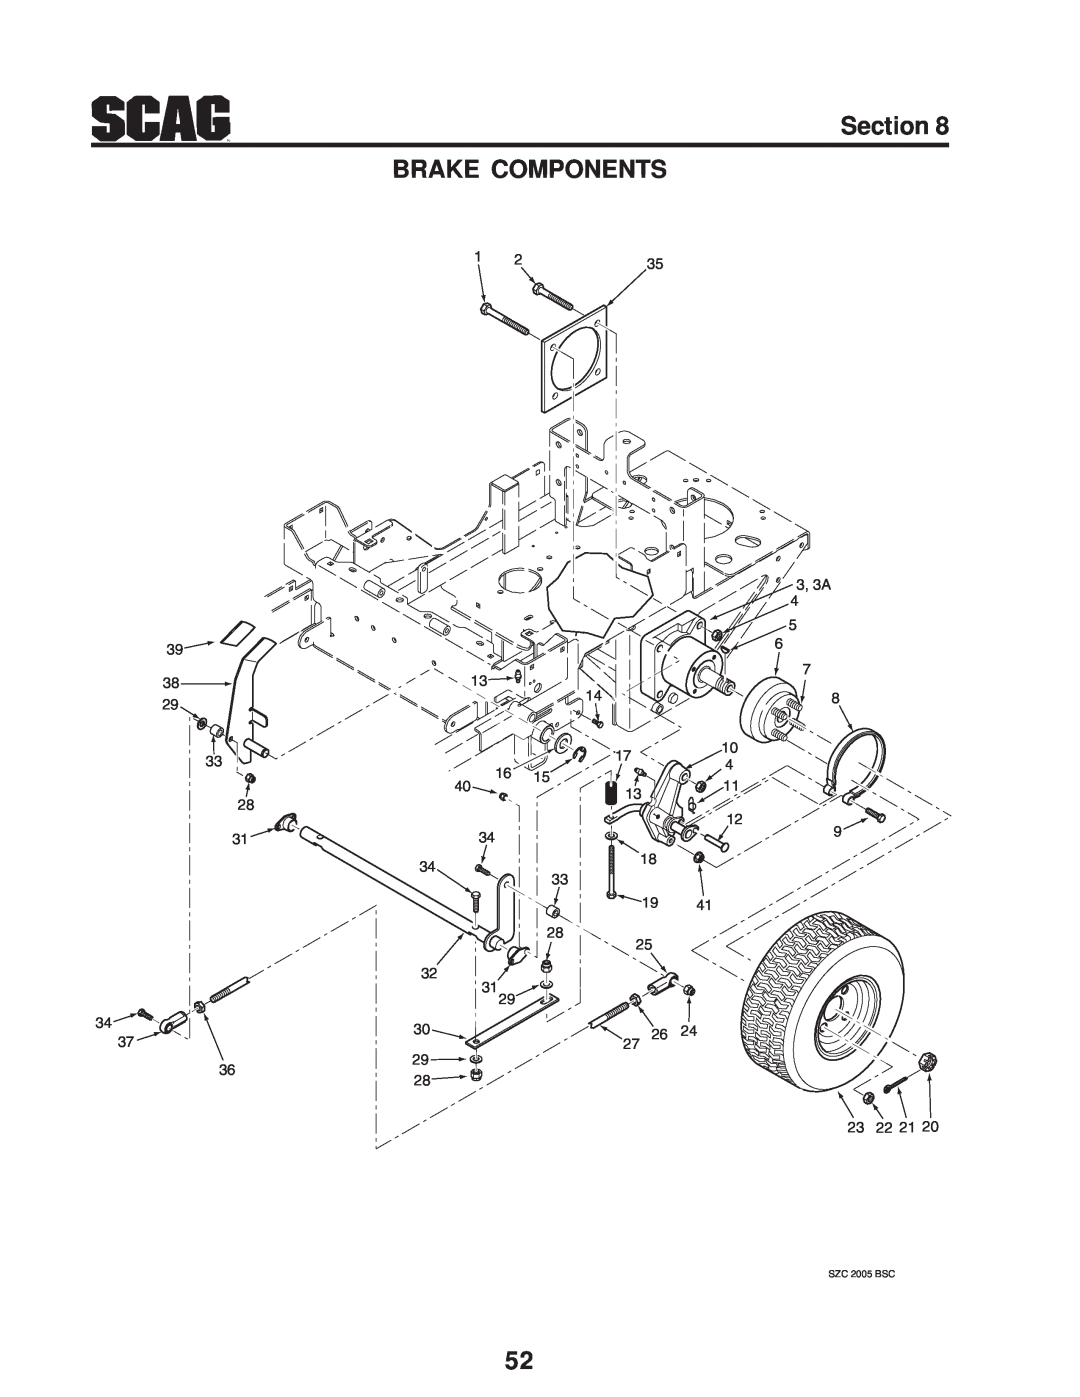 Scag Power Equipment manual Section BRAKE COMPONENTS, 3, 3A, 23 22, SZC 2005 BSC 